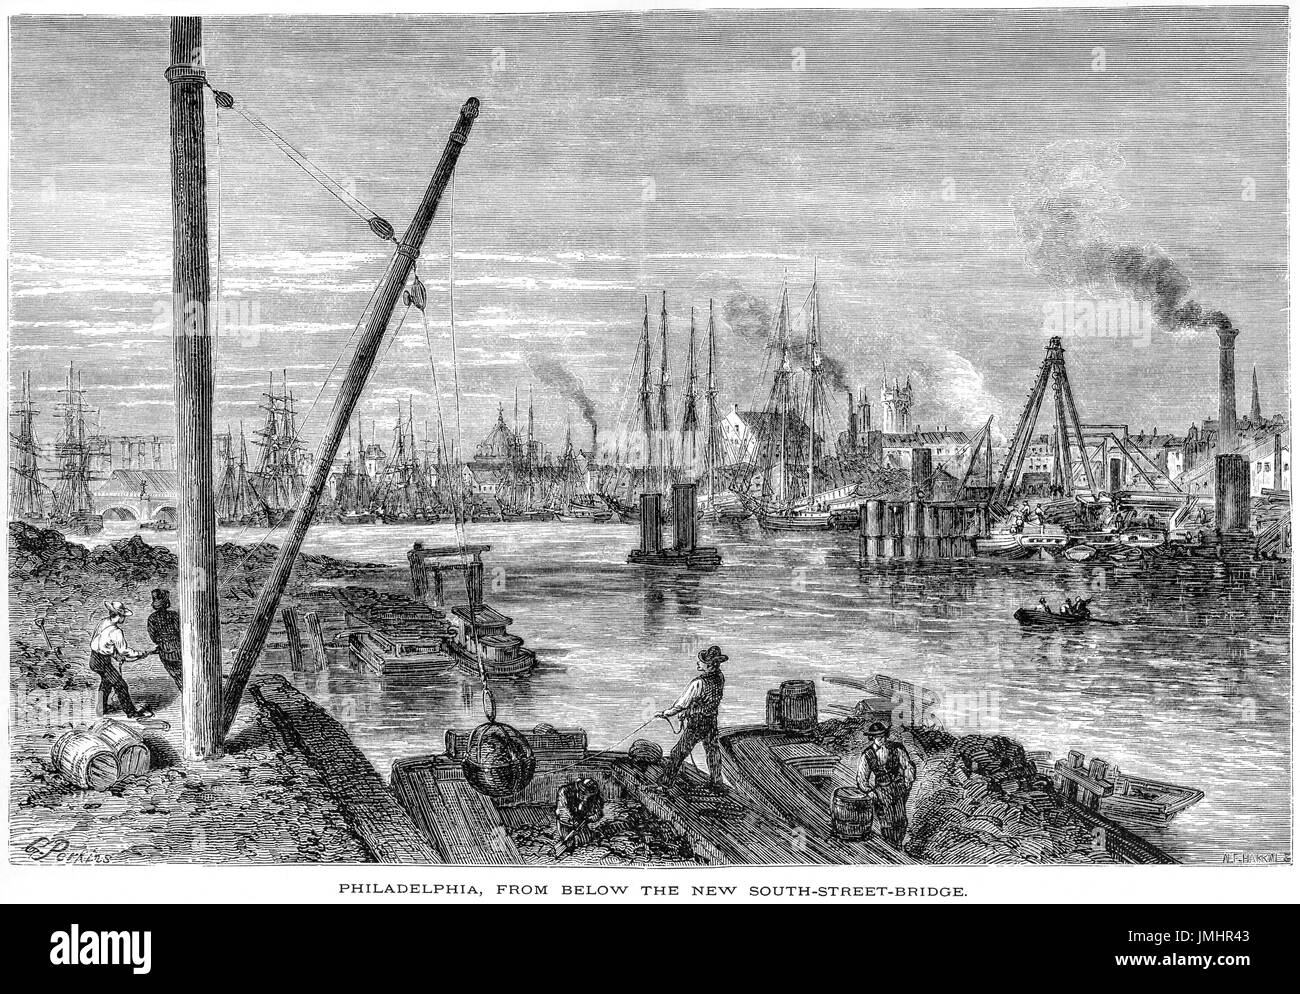 An engraving of Philadelphia from below the new South Street Bridge scanned at high resolution from a book published in 1874. Believed copyright free. Stock Photo